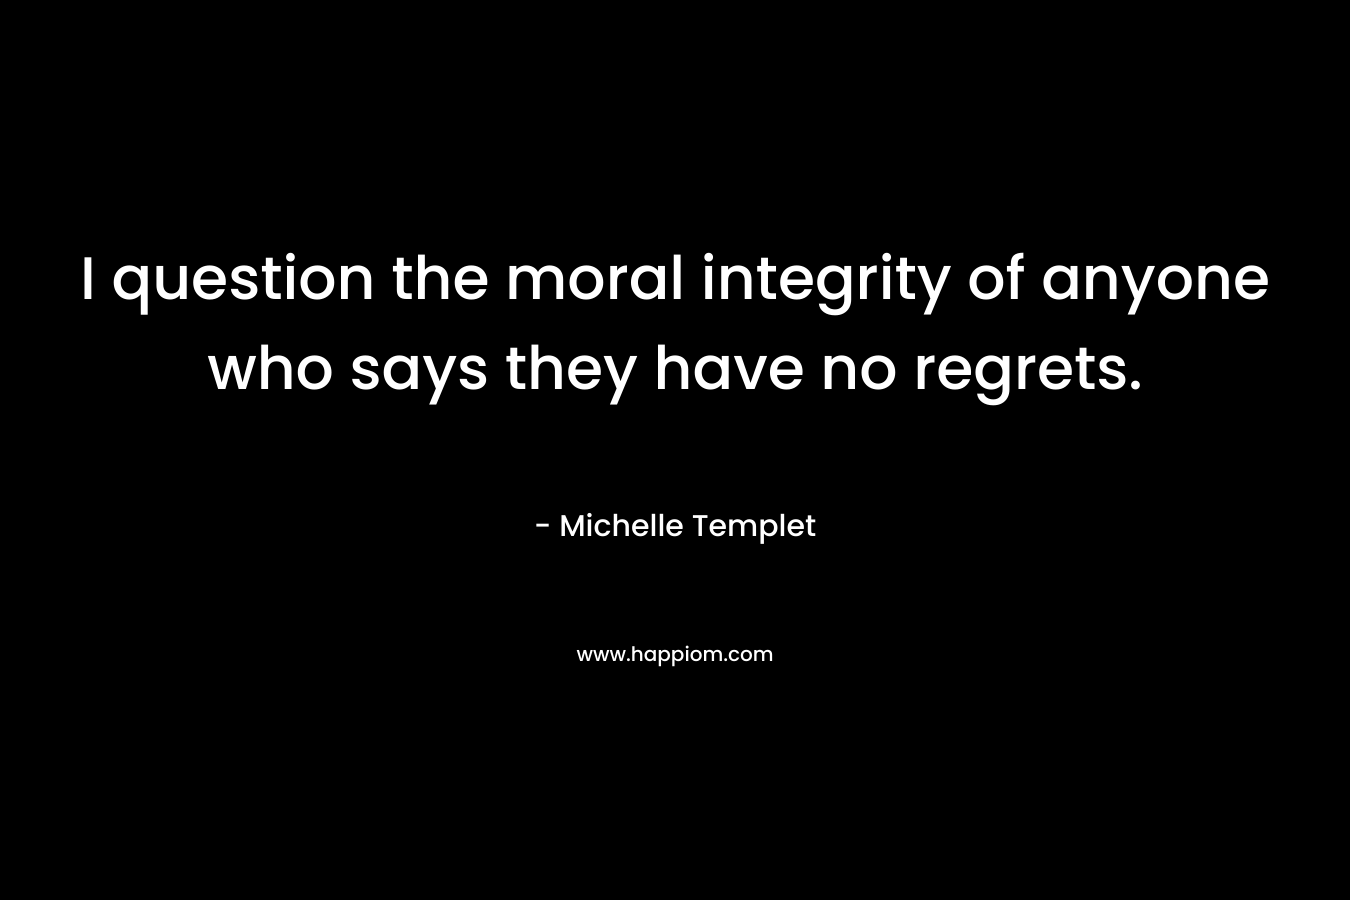 I question the moral integrity of anyone who says they have no regrets. – Michelle Templet